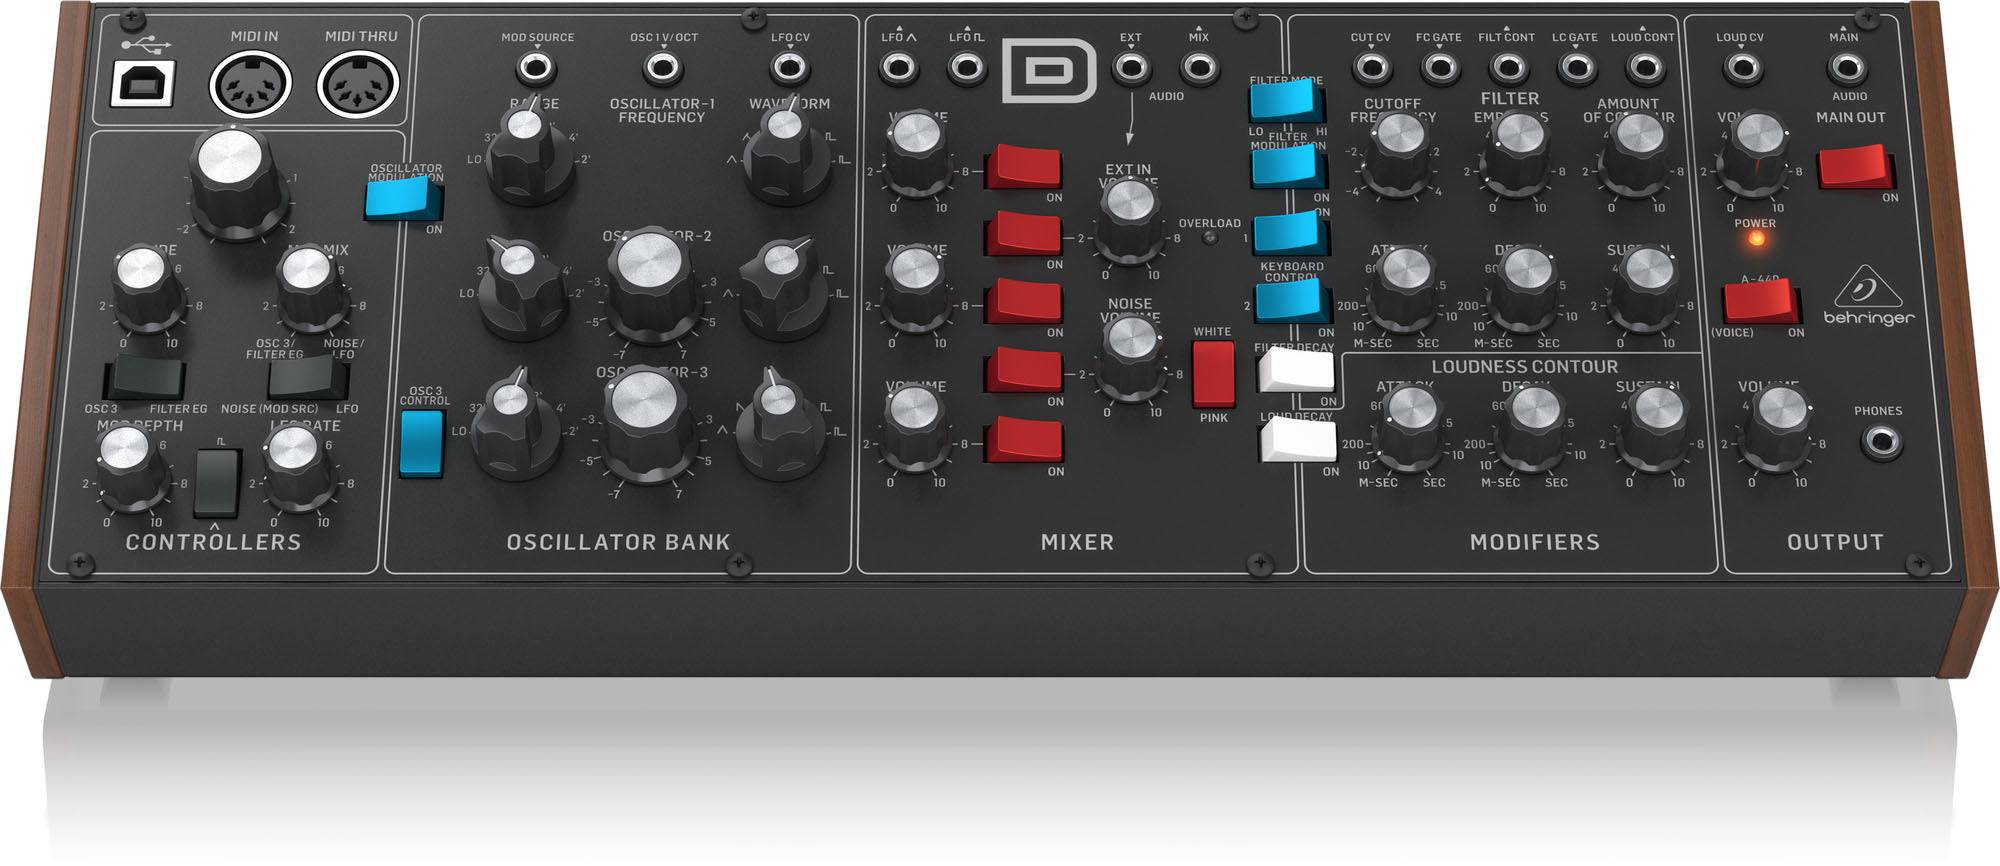 Behringer MODELD, Authentic Analog Synthesizer With 3 Vcos, Ladder Filter, LFO And Eurorack Format - Open Box - Hollywood DJ